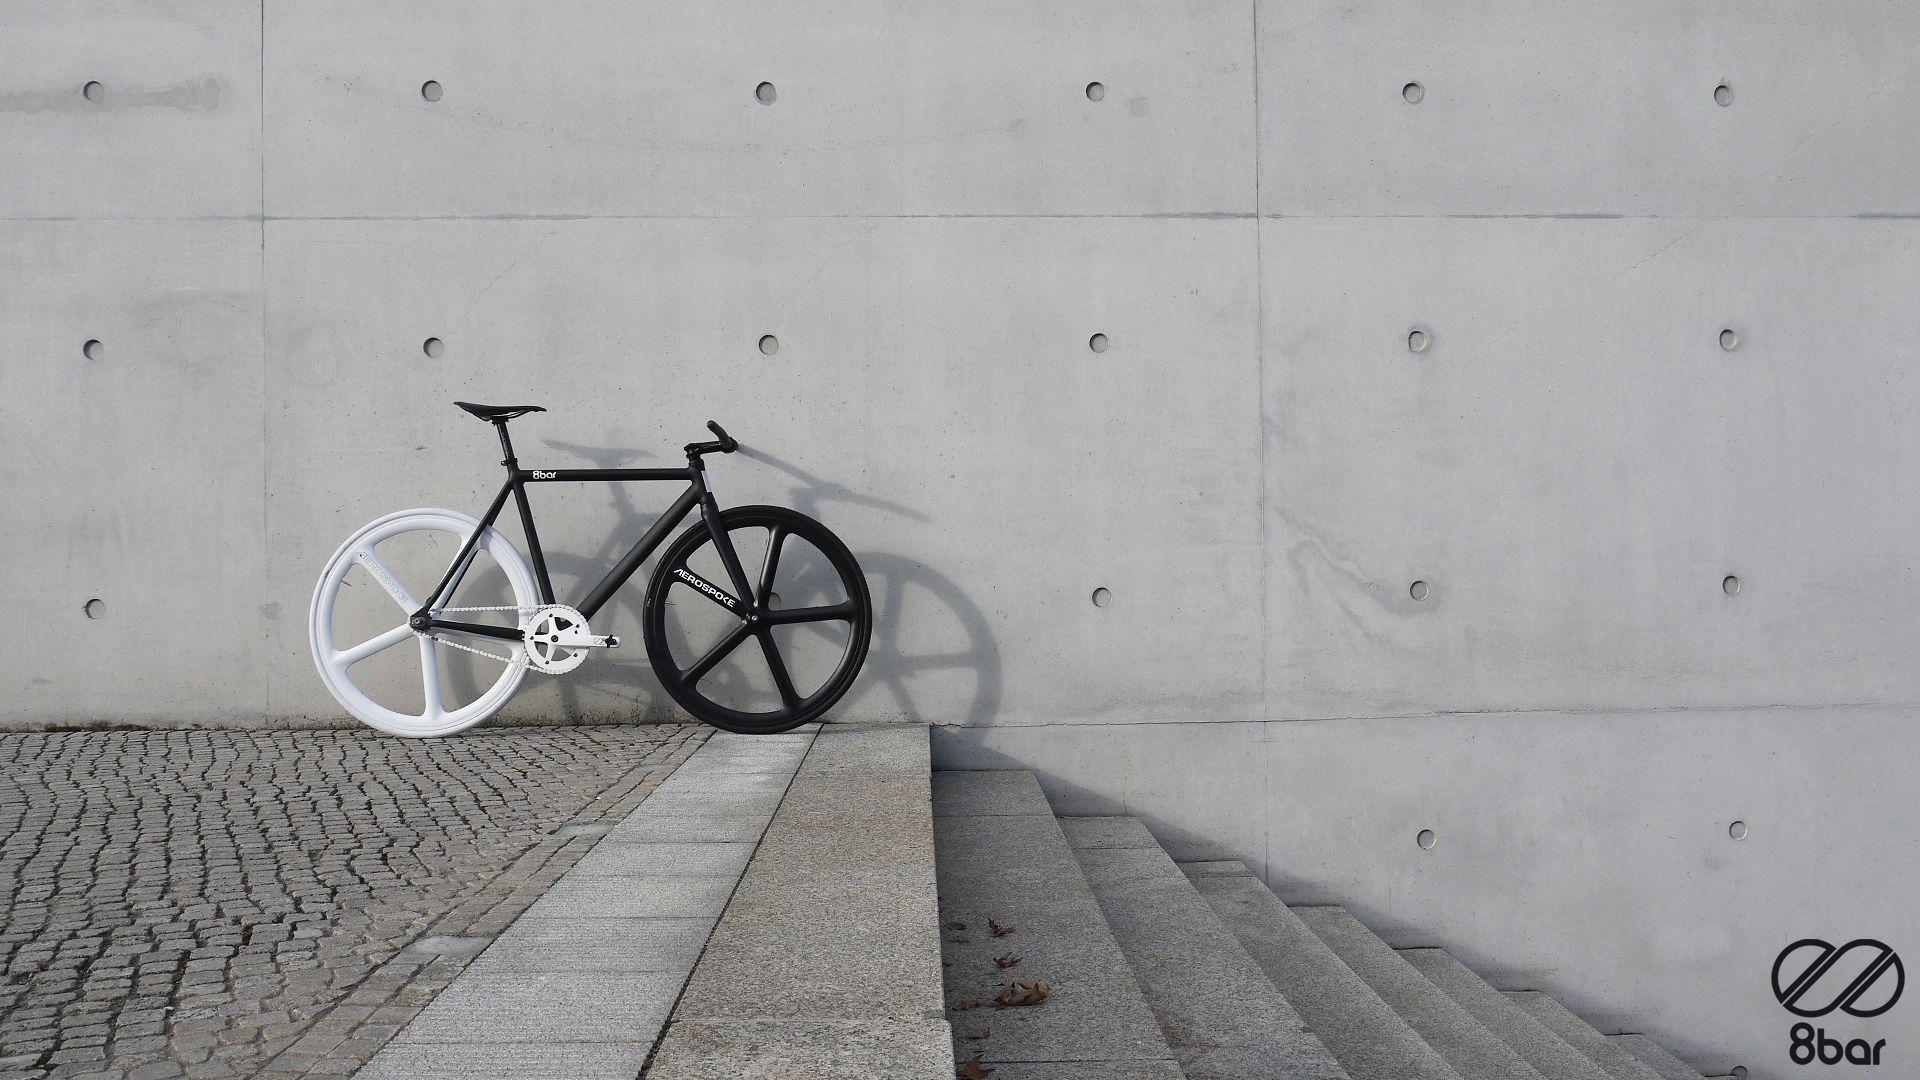 image about Fixed Gear. Fixie, Fixed Gear